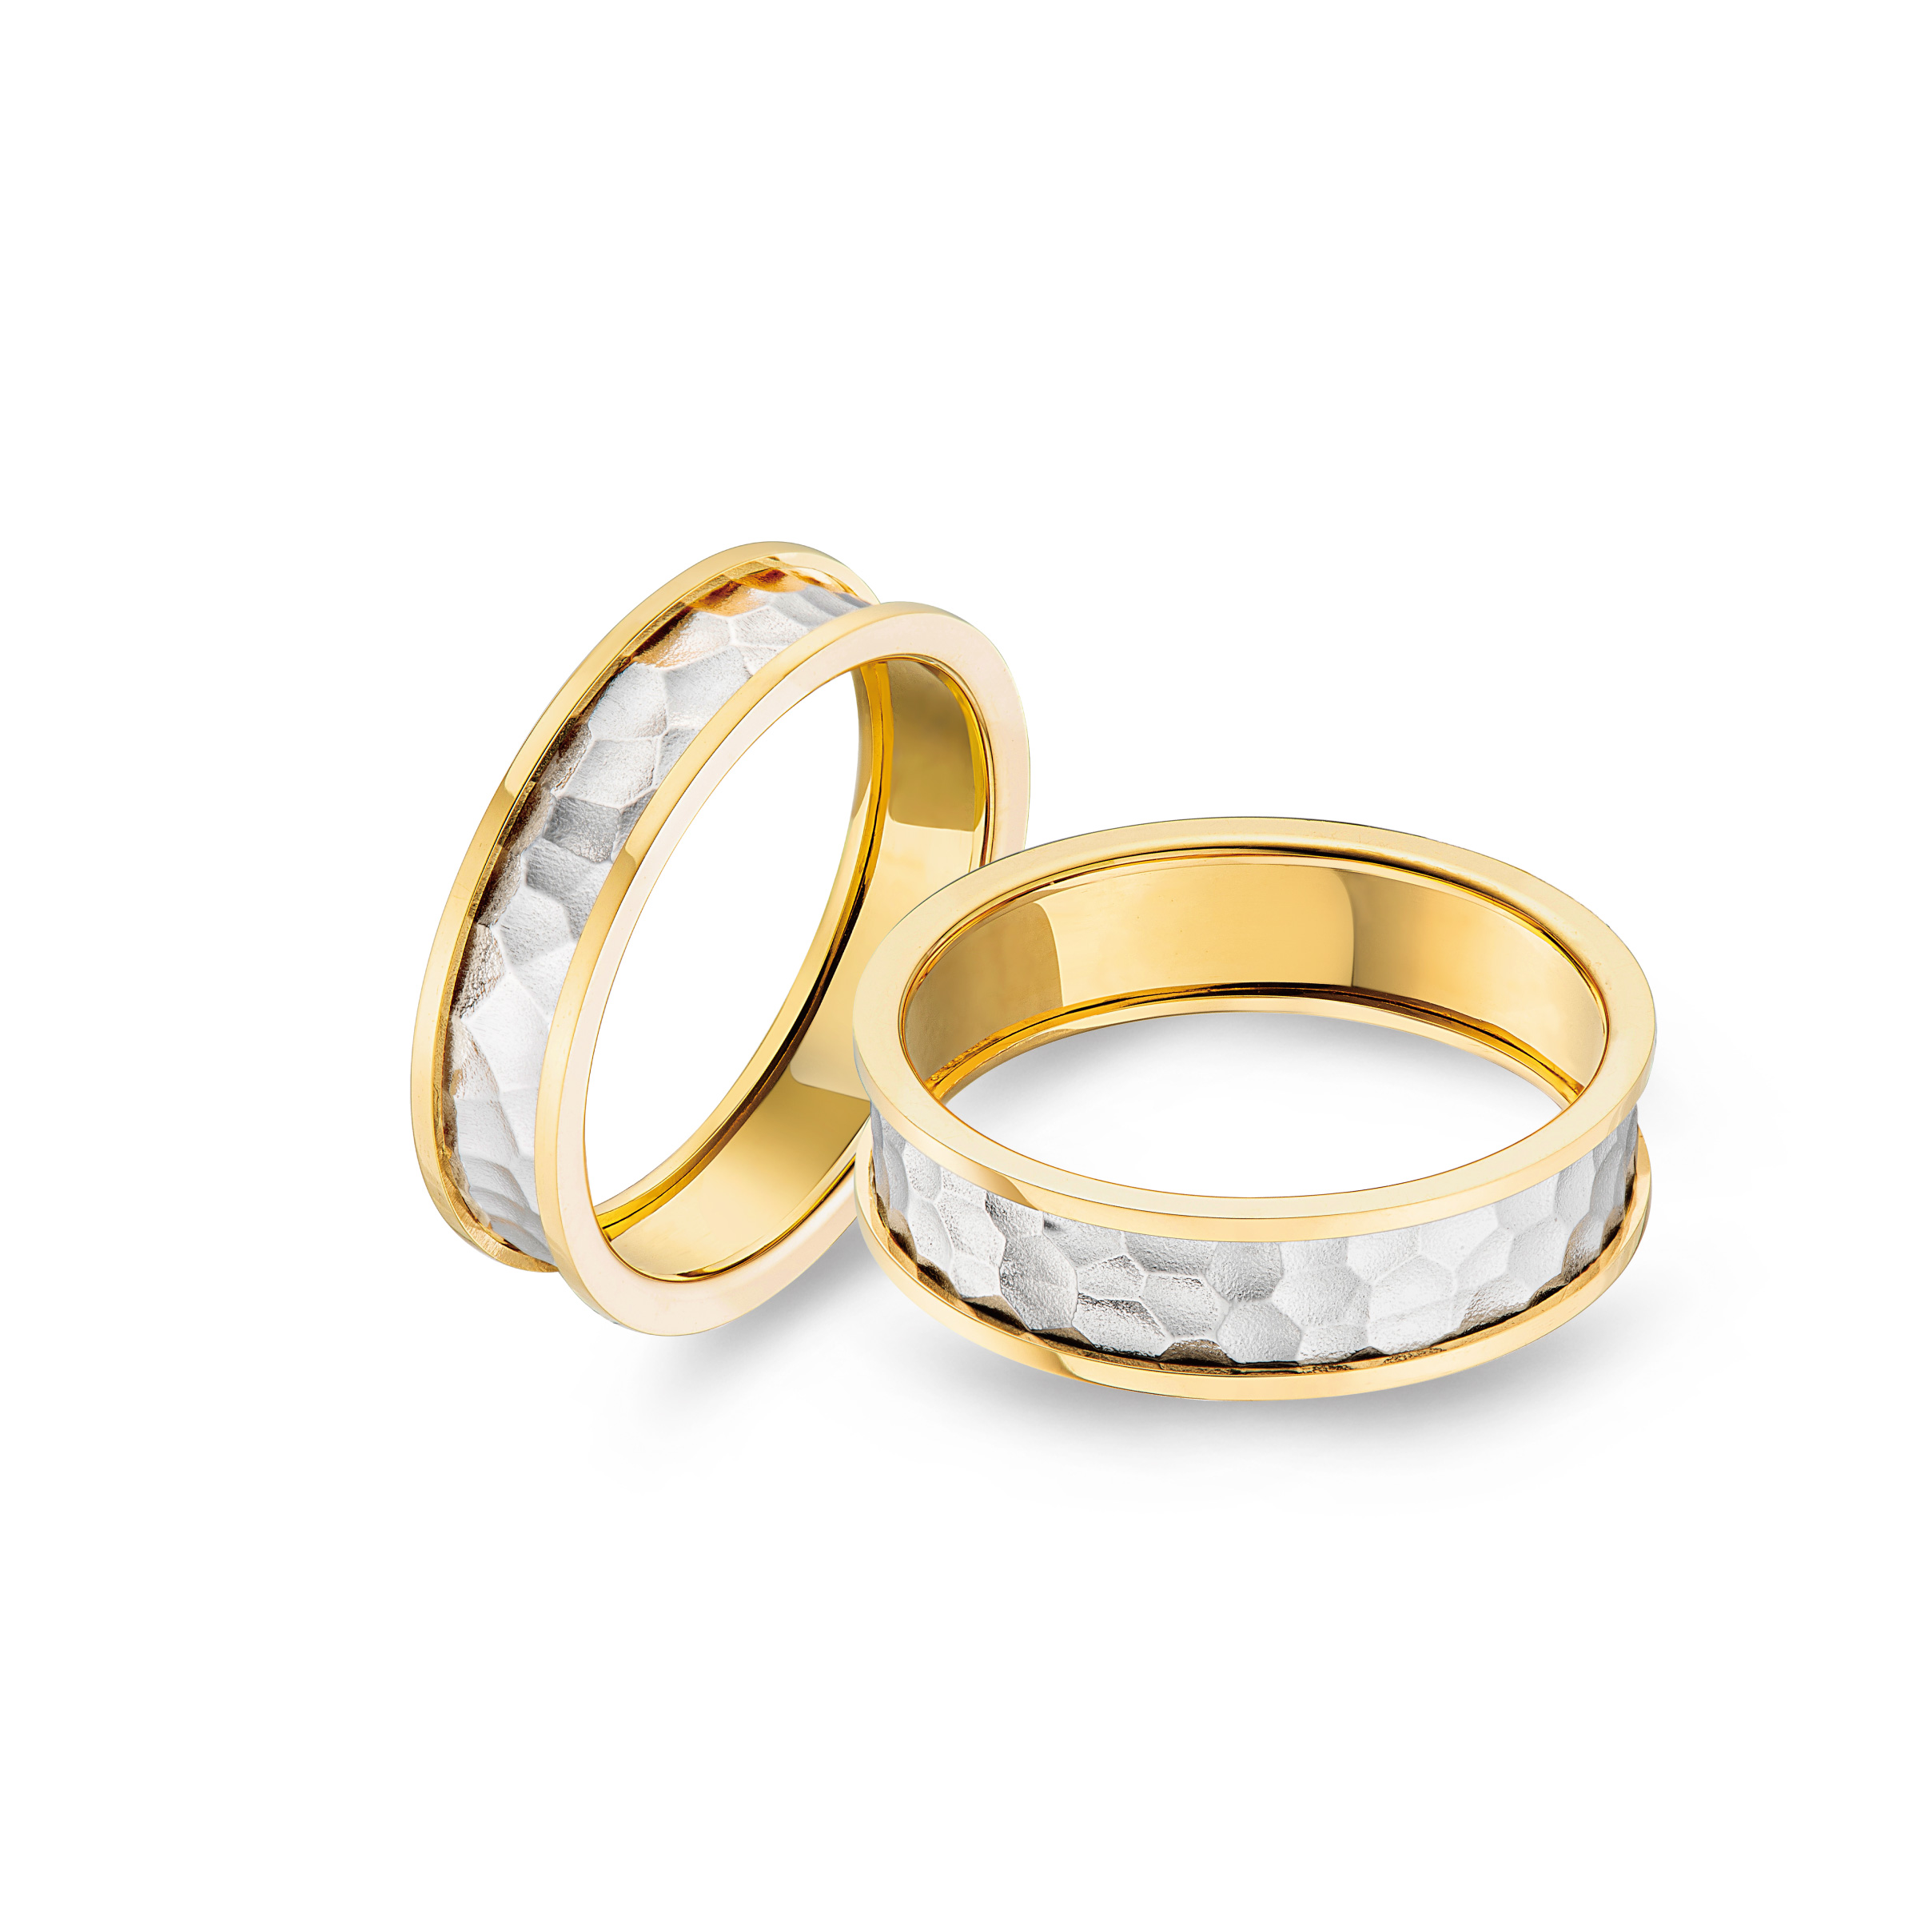 Goldstyle "Love Sentiment" Gold Couple Rings